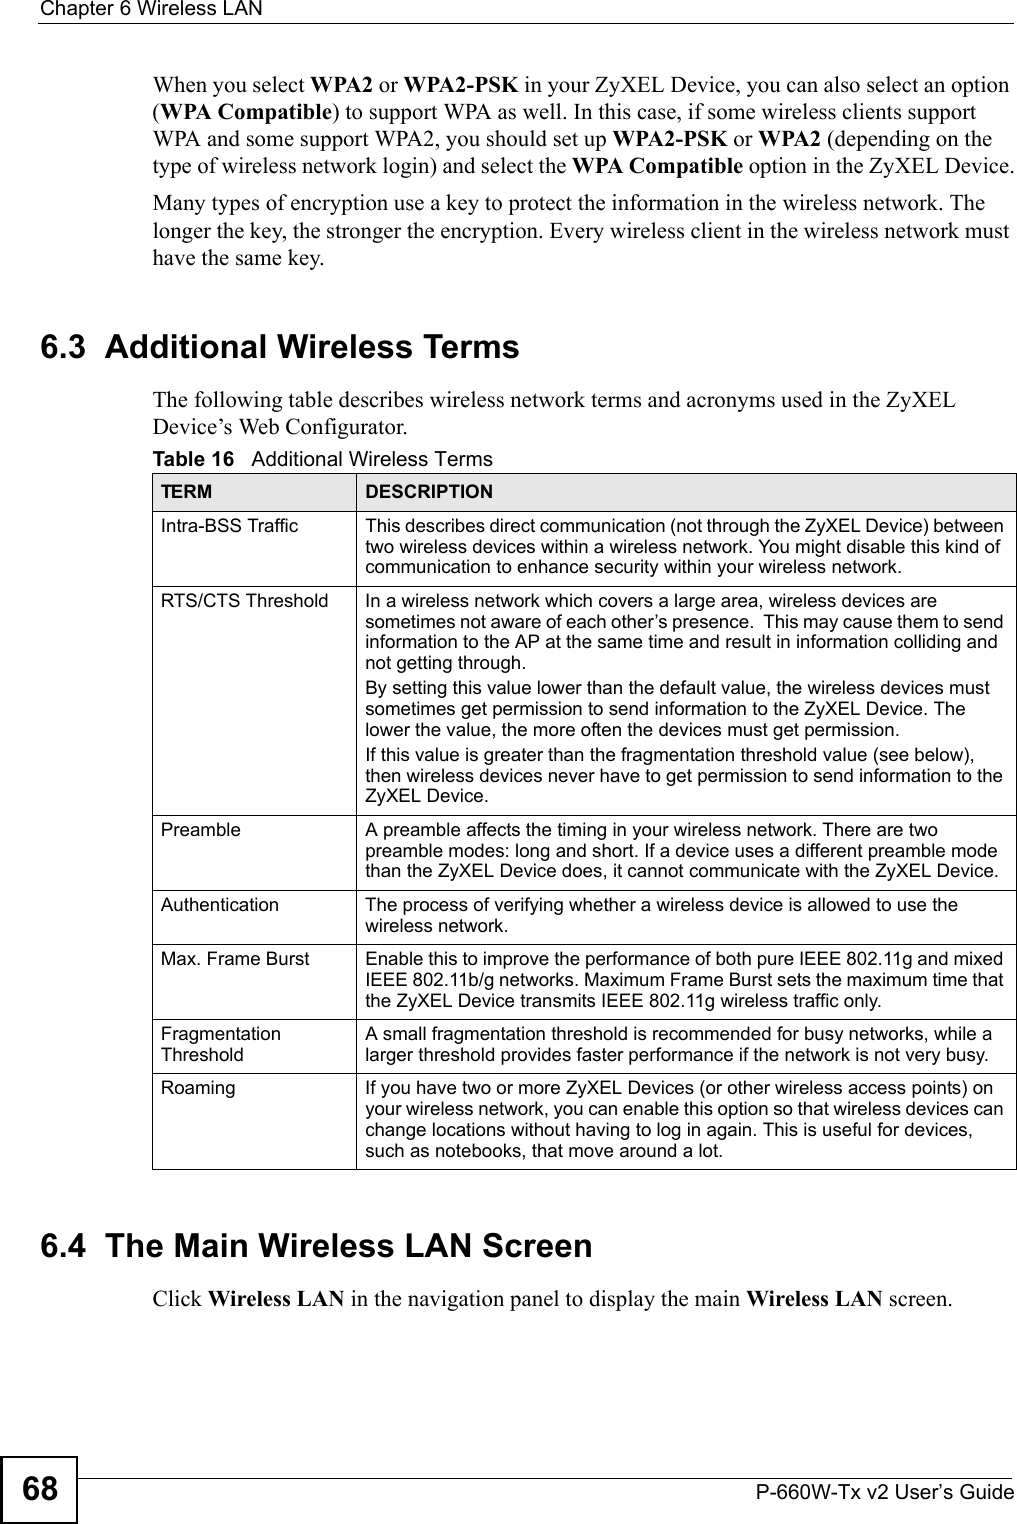 Chapter 6 Wireless LANP-660W-Tx v2 User’s Guide68When you select WPA2 or WPA2-PSK in your ZyXEL Device, you can also select an option (WPA Compatible) to support WPA as well. In this case, if some wireless clients support WPA and some support WPA2, you should set up WPA2-PSK or WPA2 (depending on the type of wireless network login) and select the WPA Compatible option in the ZyXEL Device.Many types of encryption use a key to protect the information in the wireless network. The longer the key, the stronger the encryption. Every wireless client in the wireless network must have the same key.6.3  Additional Wireless TermsThe following table describes wireless network terms and acronyms used in the ZyXEL Device’s Web Configurator.6.4  The Main Wireless LAN Screen Click Wireless LAN in the navigation panel to display the main Wireless LAN screen. Table 16   Additional Wireless TermsTERM DESCRIPTIONIntra-BSS Traffic This describes direct communication (not through the ZyXEL Device) between two wireless devices within a wireless network. You might disable this kind of communication to enhance security within your wireless network.RTS/CTS Threshold In a wireless network which covers a large area, wireless devices are sometimes not aware of each other’s presence.  This may cause them to send information to the AP at the same time and result in information colliding and not getting through.By setting this value lower than the default value, the wireless devices must sometimes get permission to send information to the ZyXEL Device. The lower the value, the more often the devices must get permission.If this value is greater than the fragmentation threshold value (see below), then wireless devices never have to get permission to send information to the ZyXEL Device.Preamble A preamble affects the timing in your wireless network. There are two preamble modes: long and short. If a device uses a different preamble mode than the ZyXEL Device does, it cannot communicate with the ZyXEL Device.Authentication The process of verifying whether a wireless device is allowed to use the wireless network.Max. Frame Burst Enable this to improve the performance of both pure IEEE 802.11g and mixed IEEE 802.11b/g networks. Maximum Frame Burst sets the maximum time that the ZyXEL Device transmits IEEE 802.11g wireless traffic only.Fragmentation ThresholdA small fragmentation threshold is recommended for busy networks, while a larger threshold provides faster performance if the network is not very busy.Roaming If you have two or more ZyXEL Devices (or other wireless access points) on your wireless network, you can enable this option so that wireless devices can change locations without having to log in again. This is useful for devices, such as notebooks, that move around a lot.